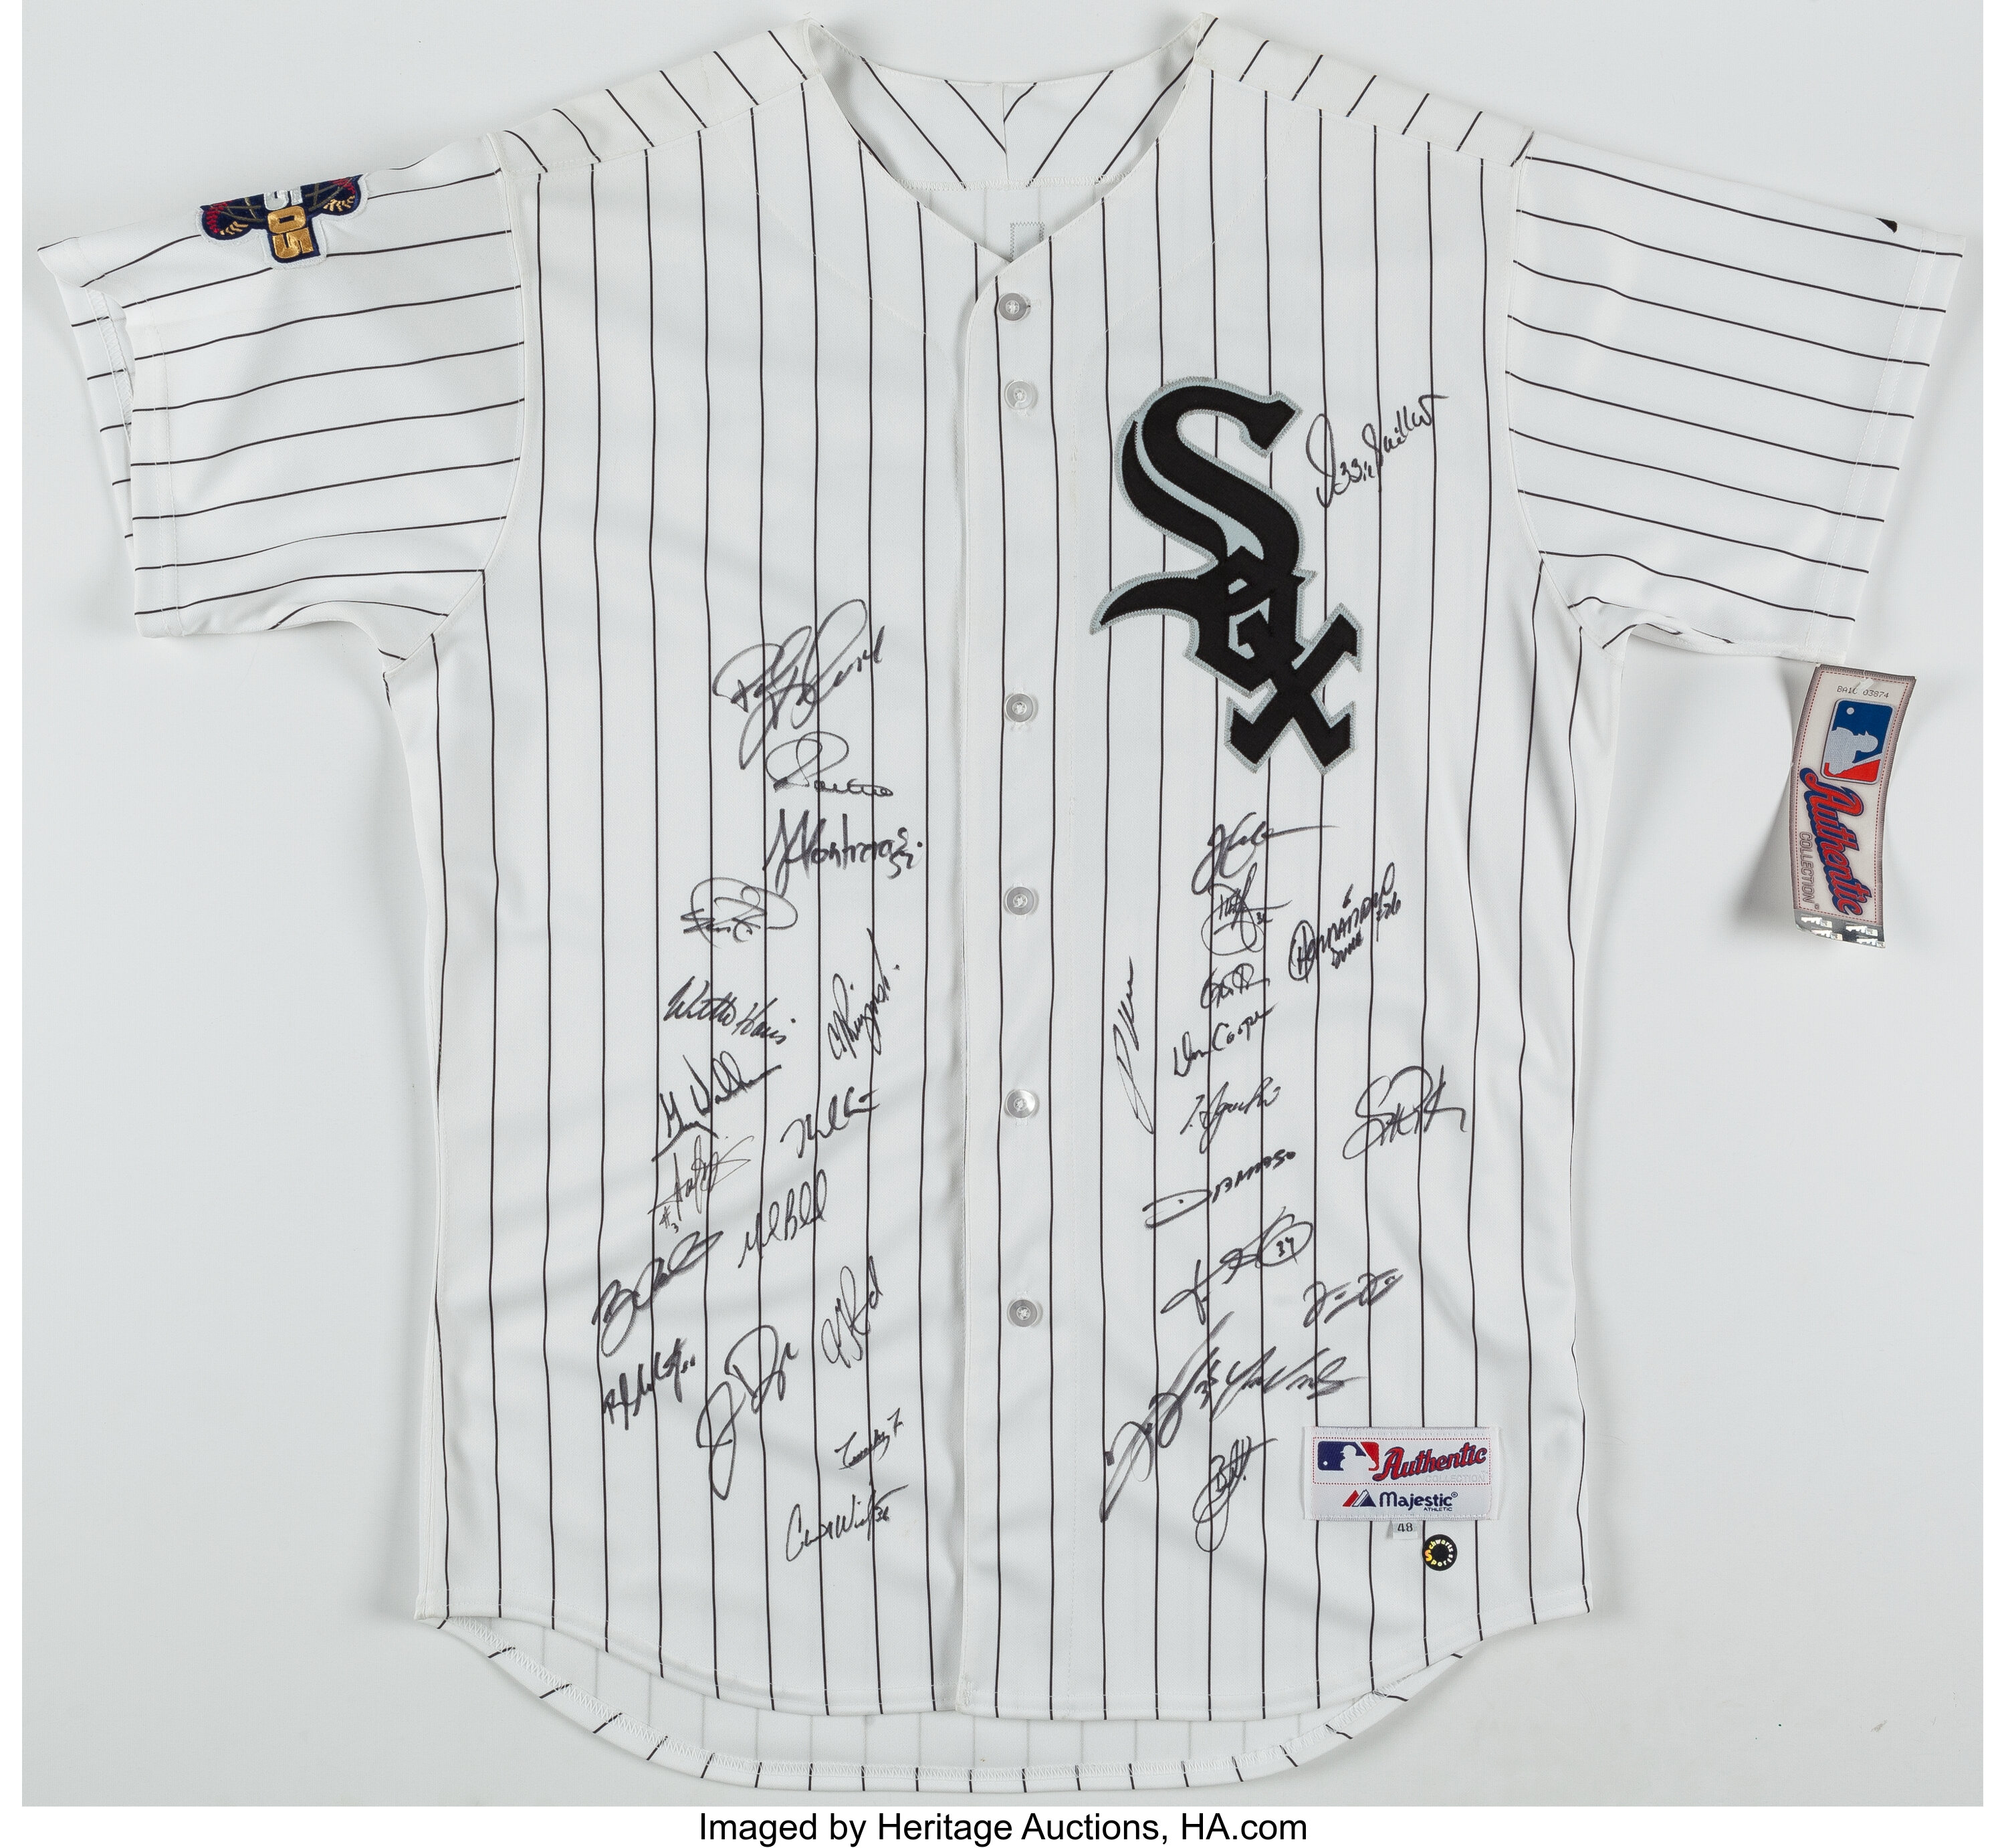 Ozzie Gullen Signed White Sox Jersey with 2005 World Series Patch